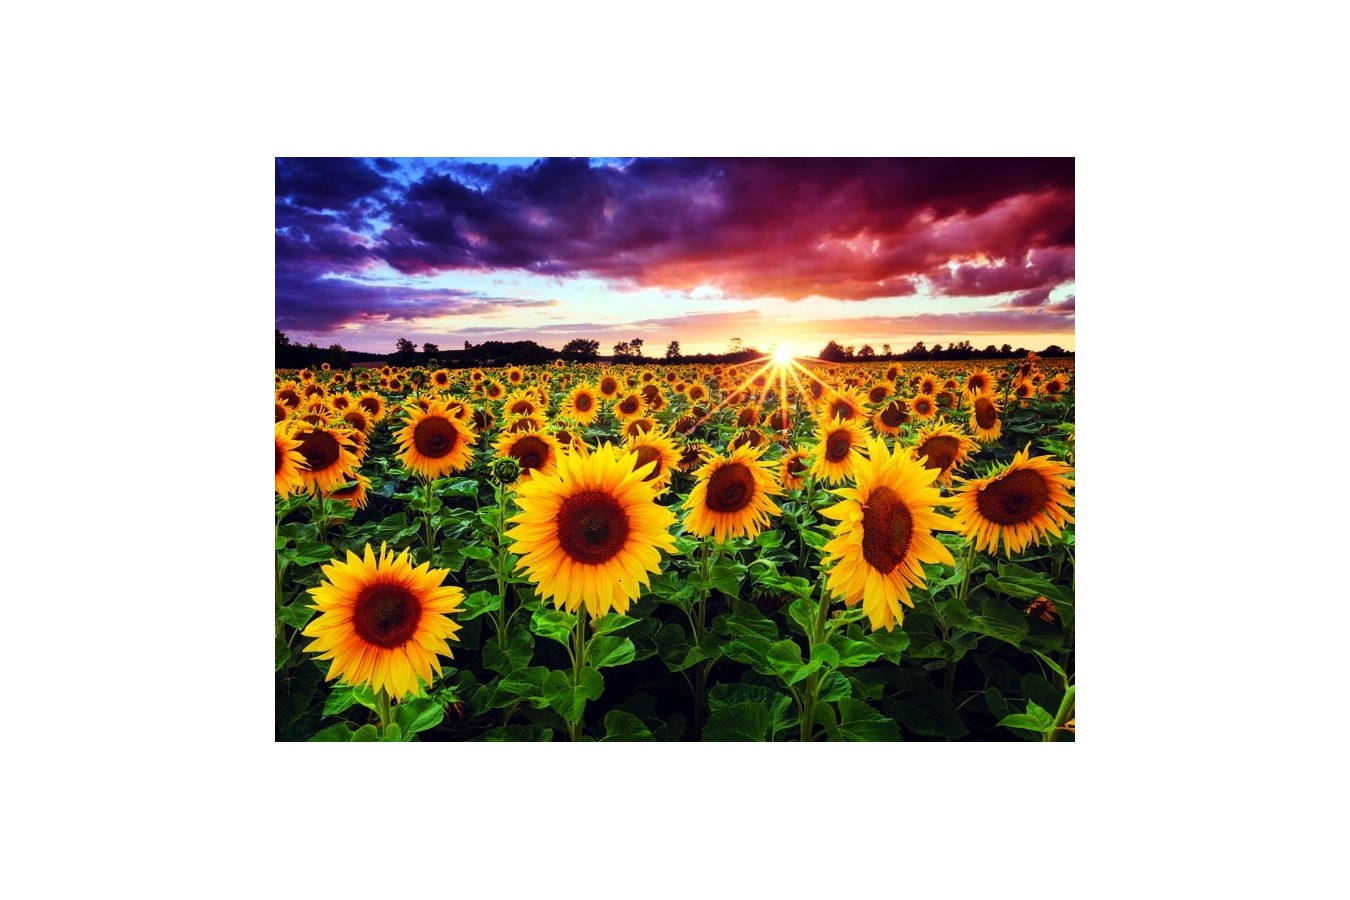 Puzzle Anatolian - Field of sunflowers at dusk, 1000 piese (1018)